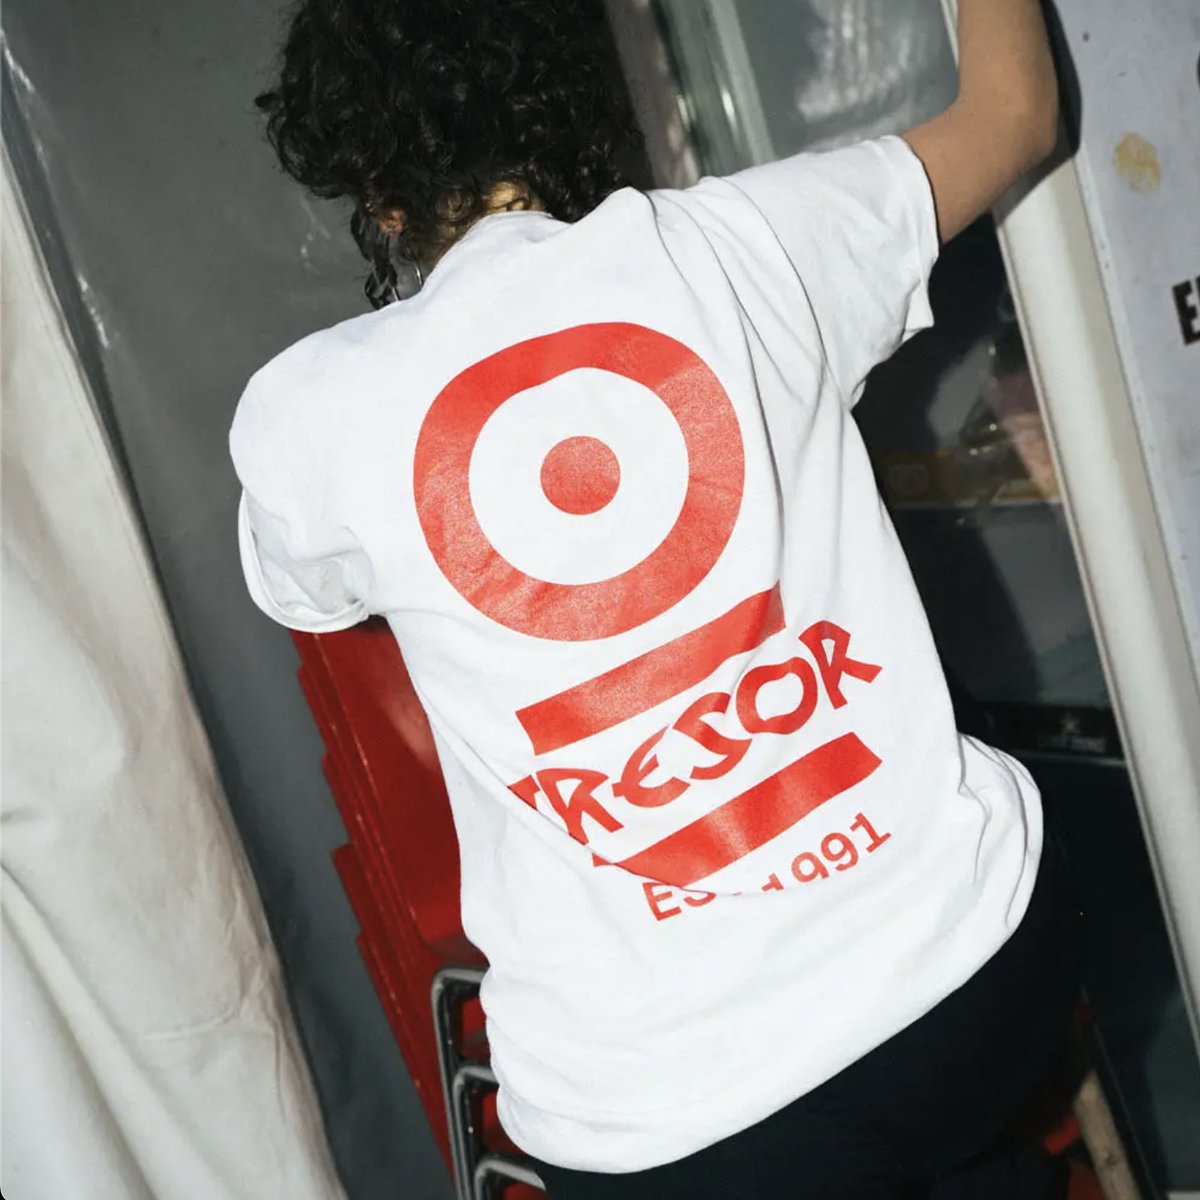 A limited edition run of @TresorBerlin classic white t-shirts with red screen-print motif and text are in stock at Inverted Audio Record Store available in medium, large and x-large. inverted-audio.store/collections/cl…